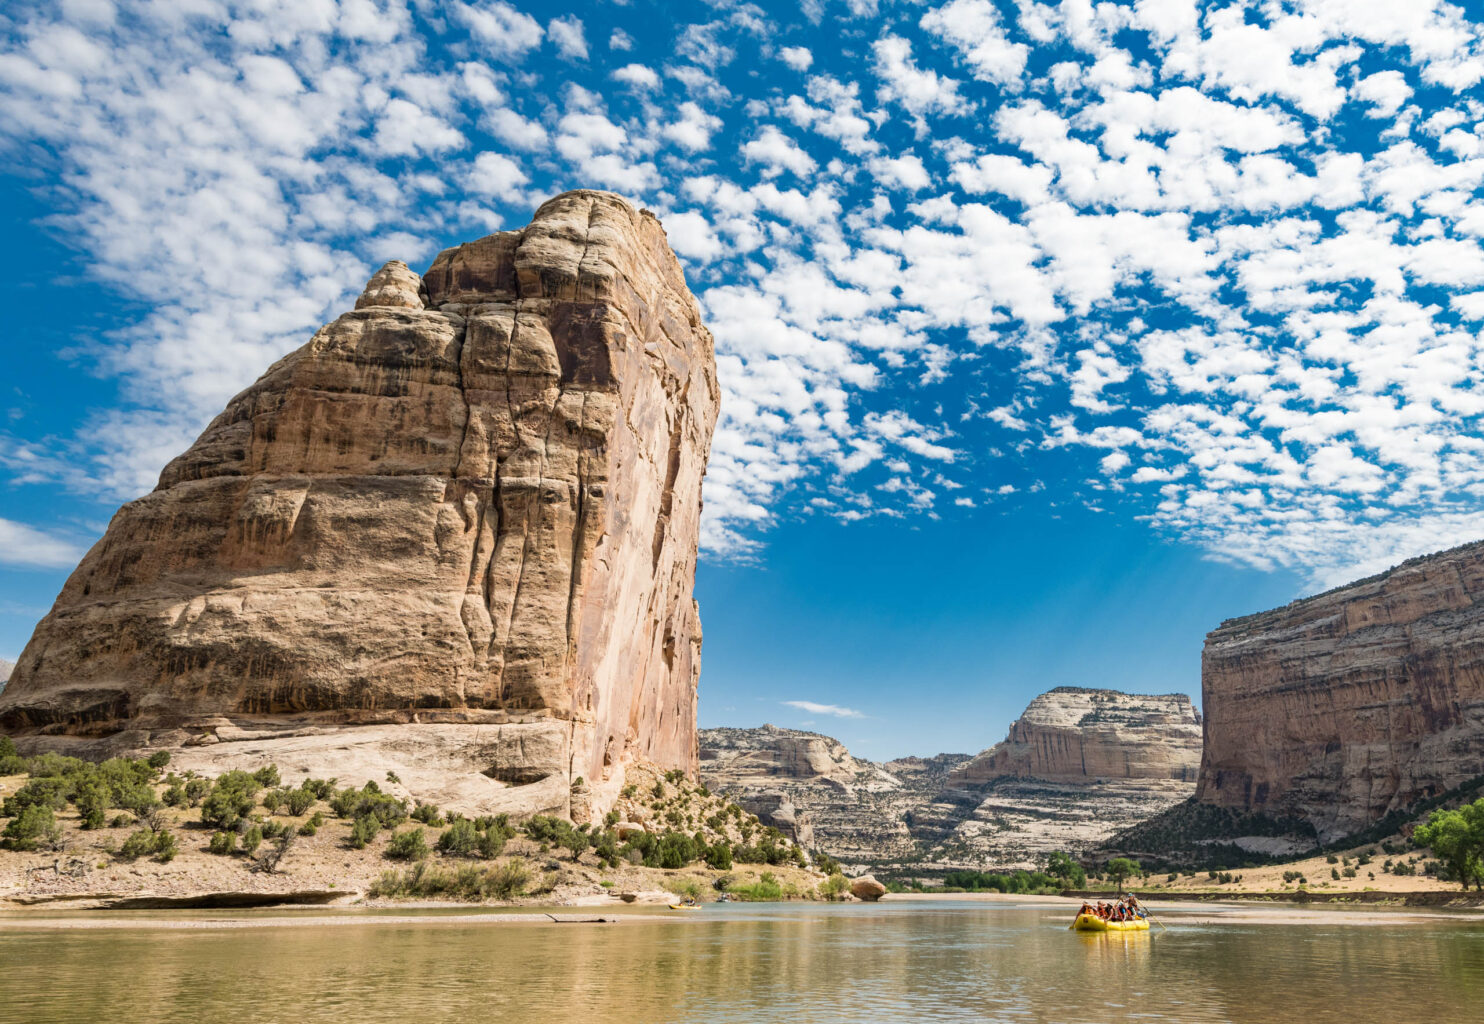 A yellow raft floats next to giant rock formation knowns at Steamboat Rock on the Green River